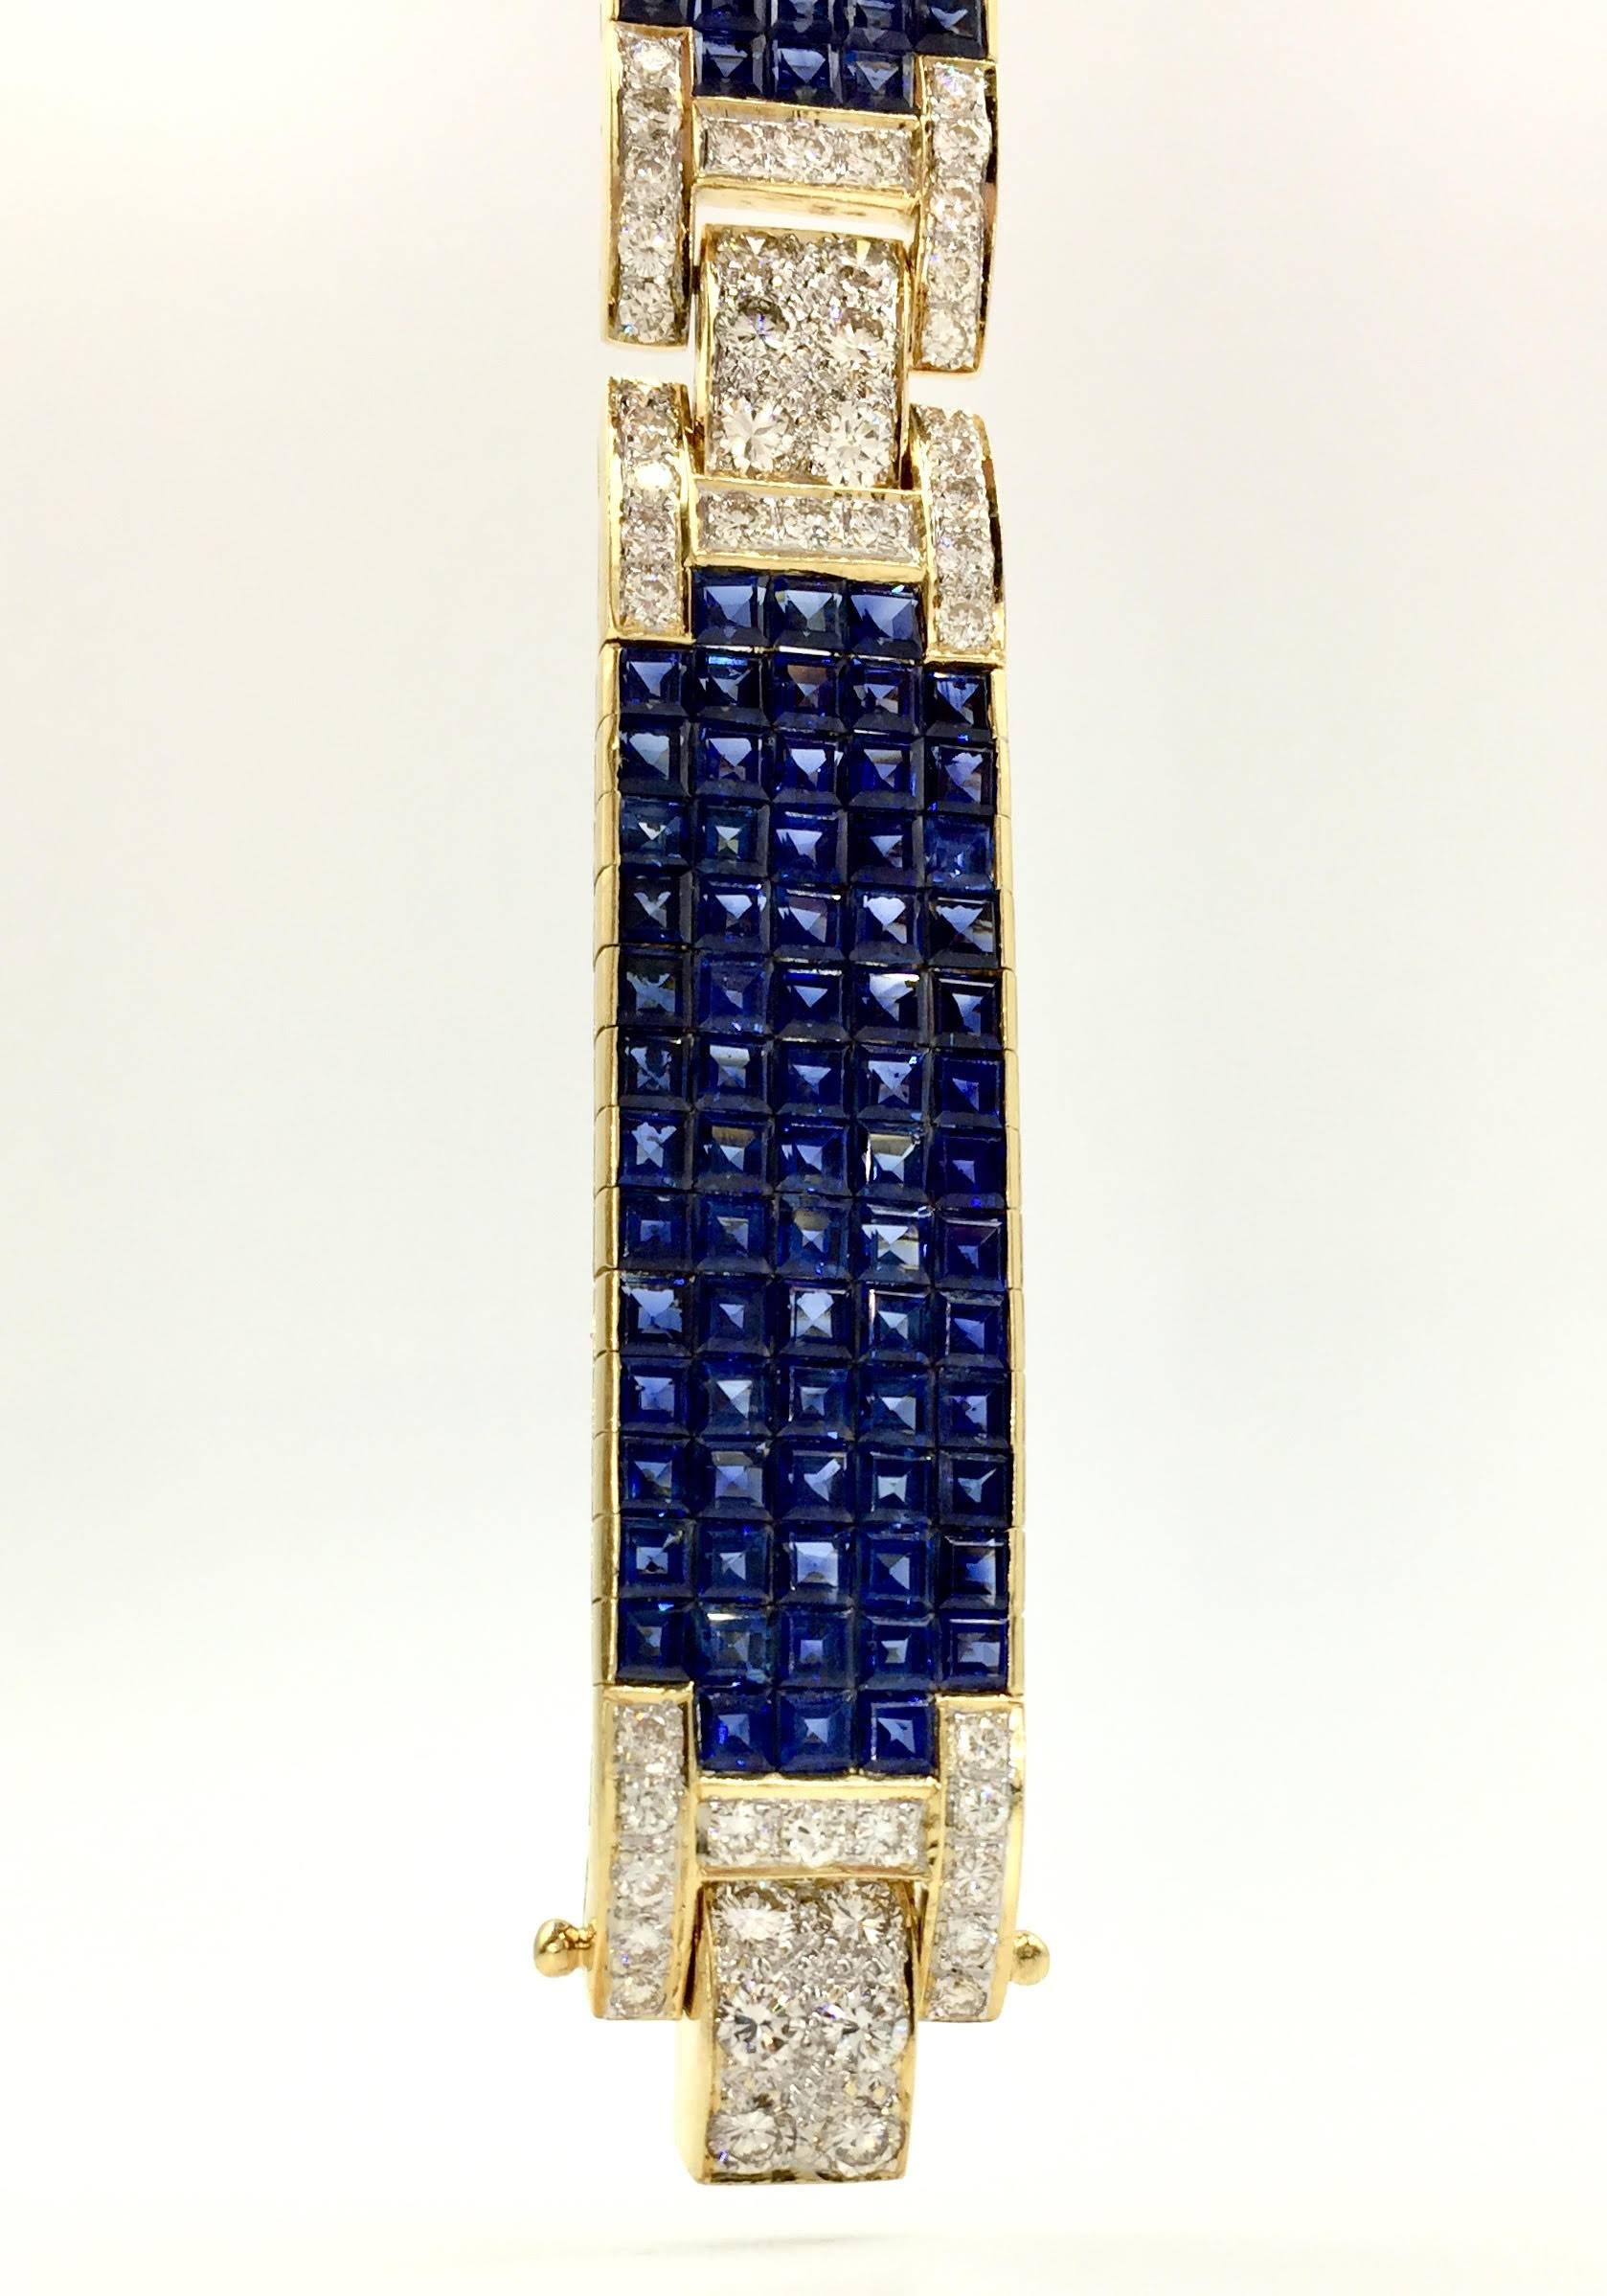 A truly exquisite find. This genuine blue sapphire and diamond bracelet is as comfortable as it is beautiful. 213 princess-cut blue sapphires are an incredible shade of royal blue with an approximate total weight of 35.00 carats. Approximately 4.00